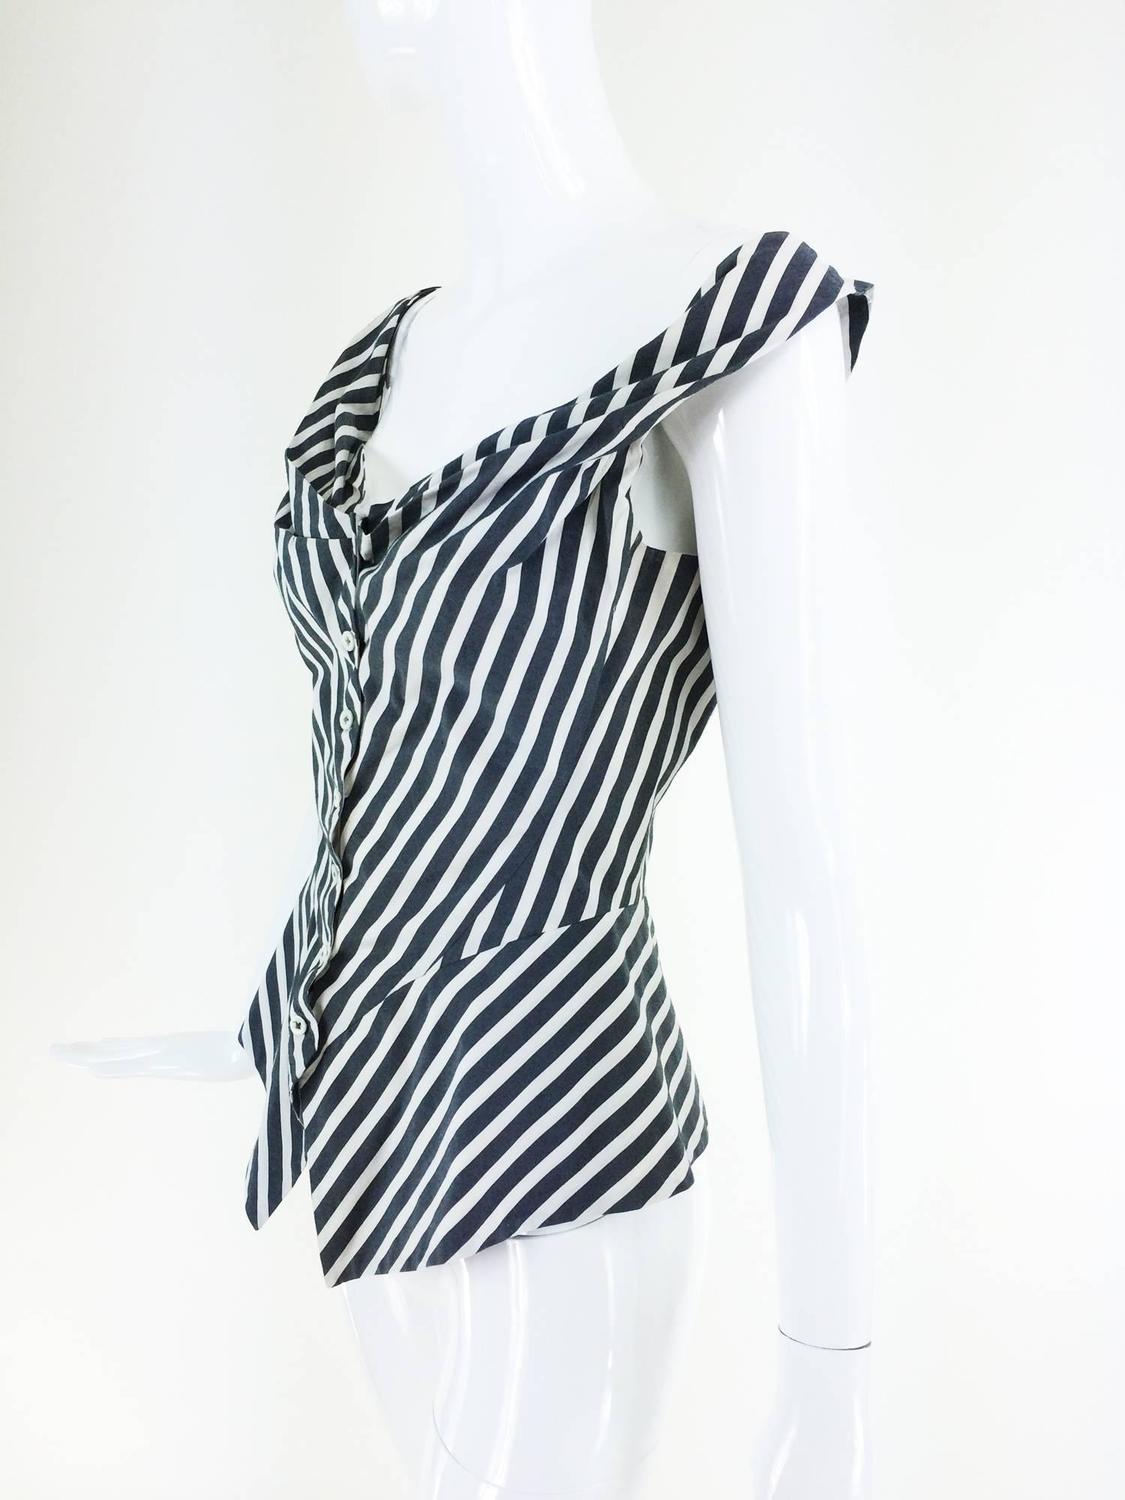 Vivienne Westwood Anglomania black and white striped corset top 1990s ...